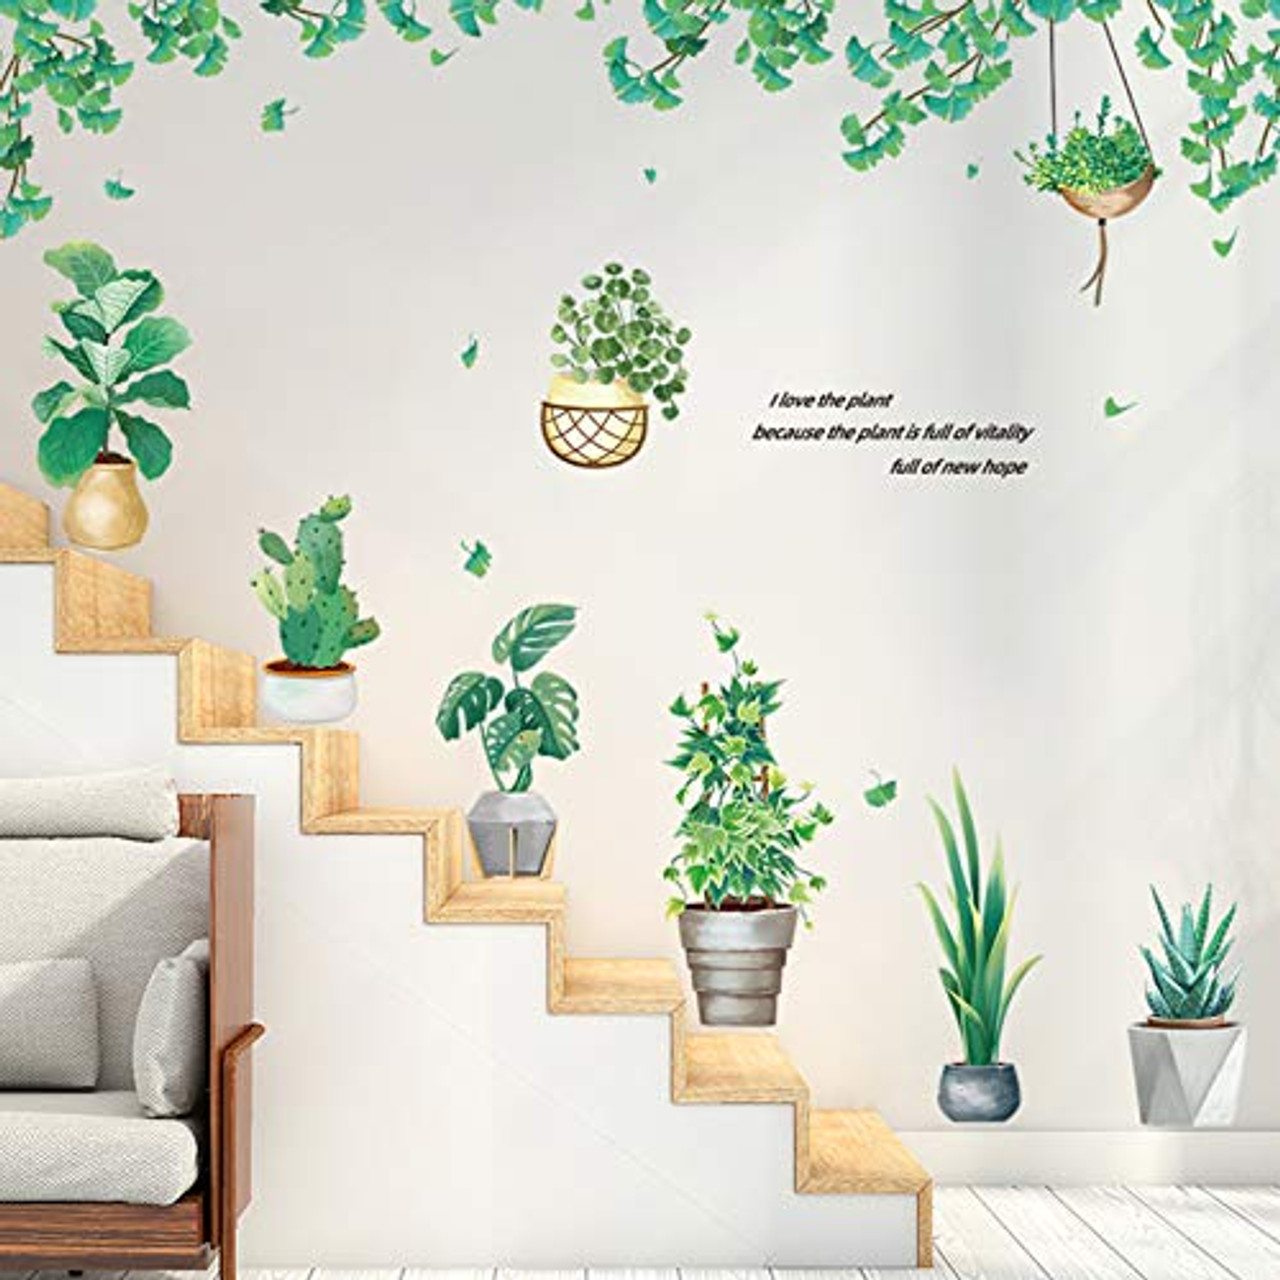 OOTSR Green Potted Plants Wall Decals Hanging Leaves Wall Stickers Removable Waterproof Decorations Tropical Leaf Wall Art Mural Decor for Living Room Study Windows 